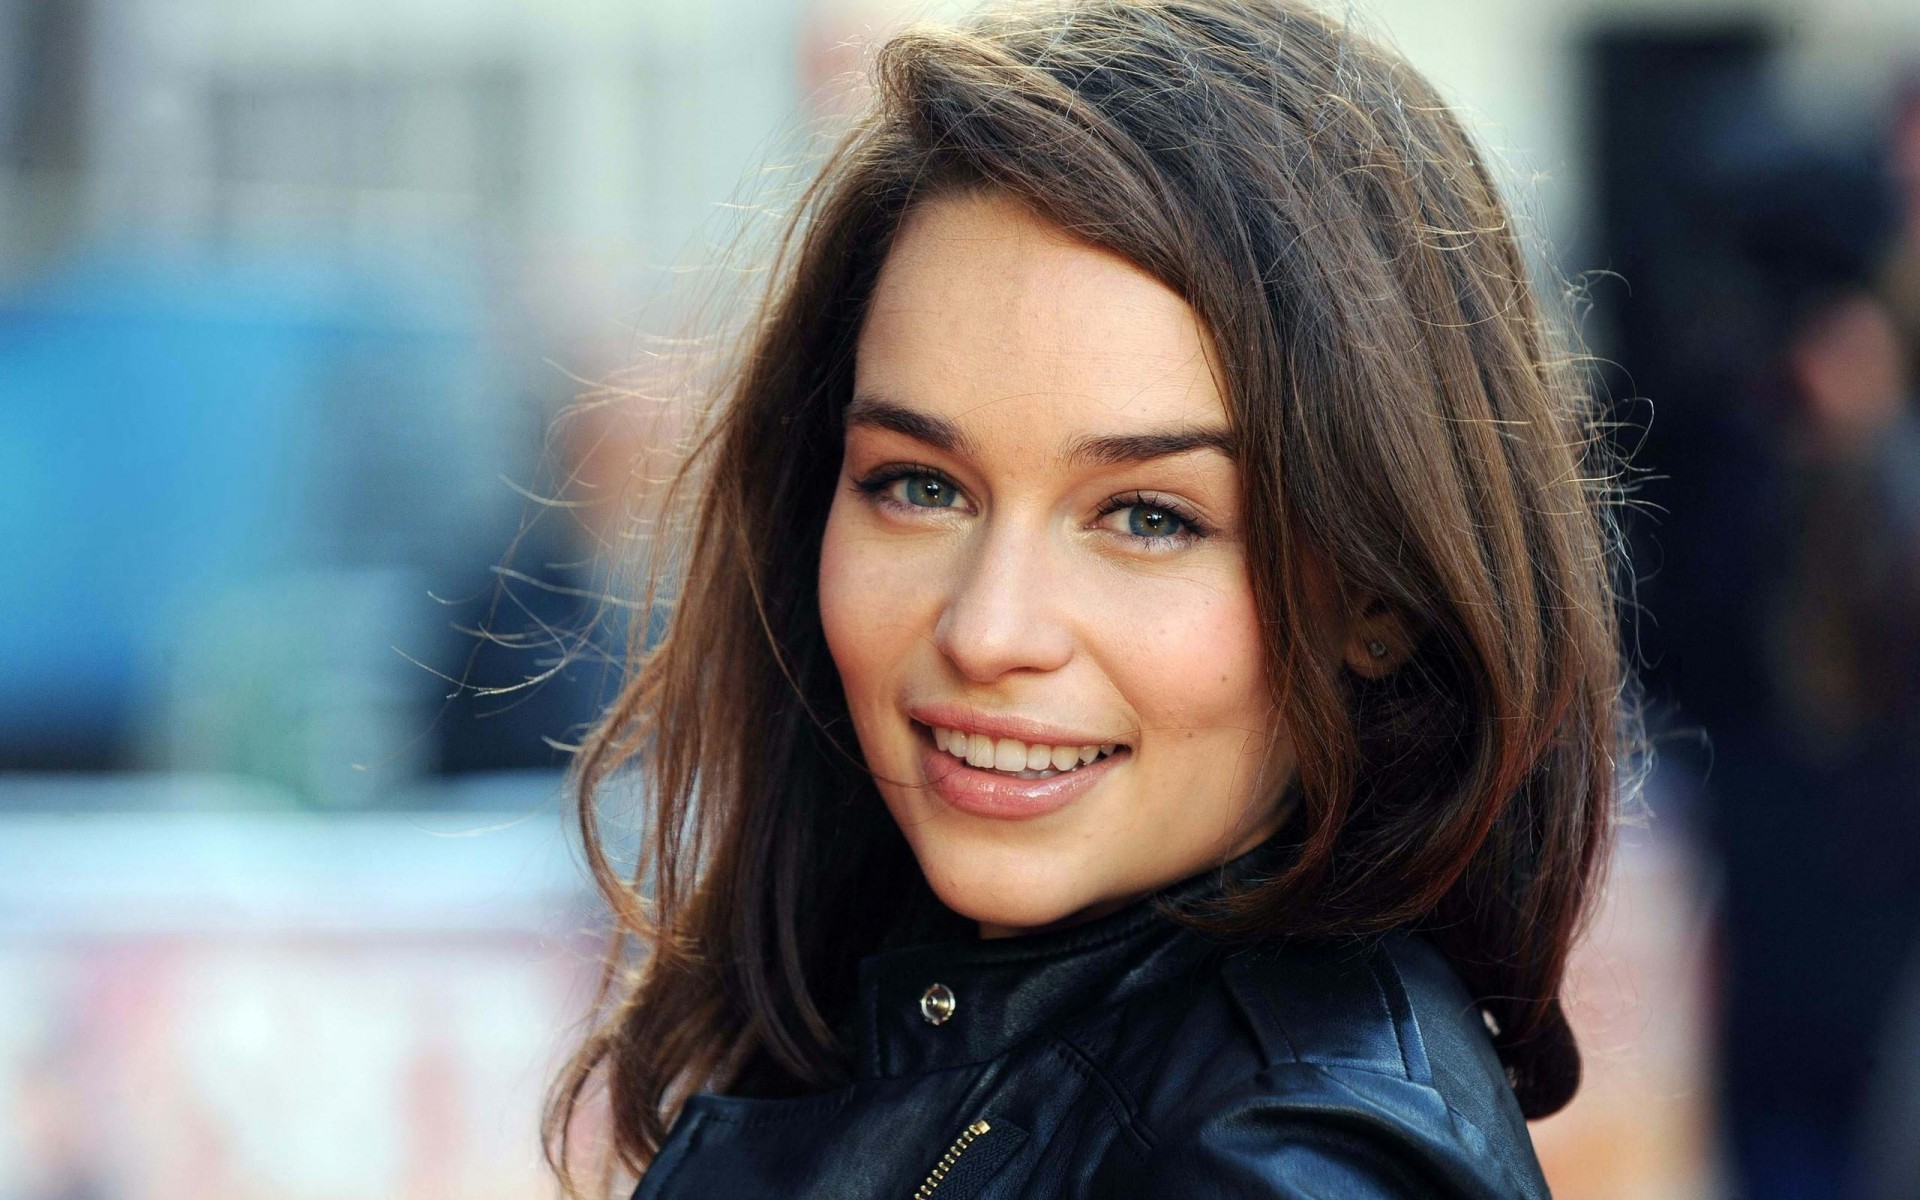 Emilia Clarke Game Of Thrones Wallpapers,Most Expensive Real Estate In The World 2019